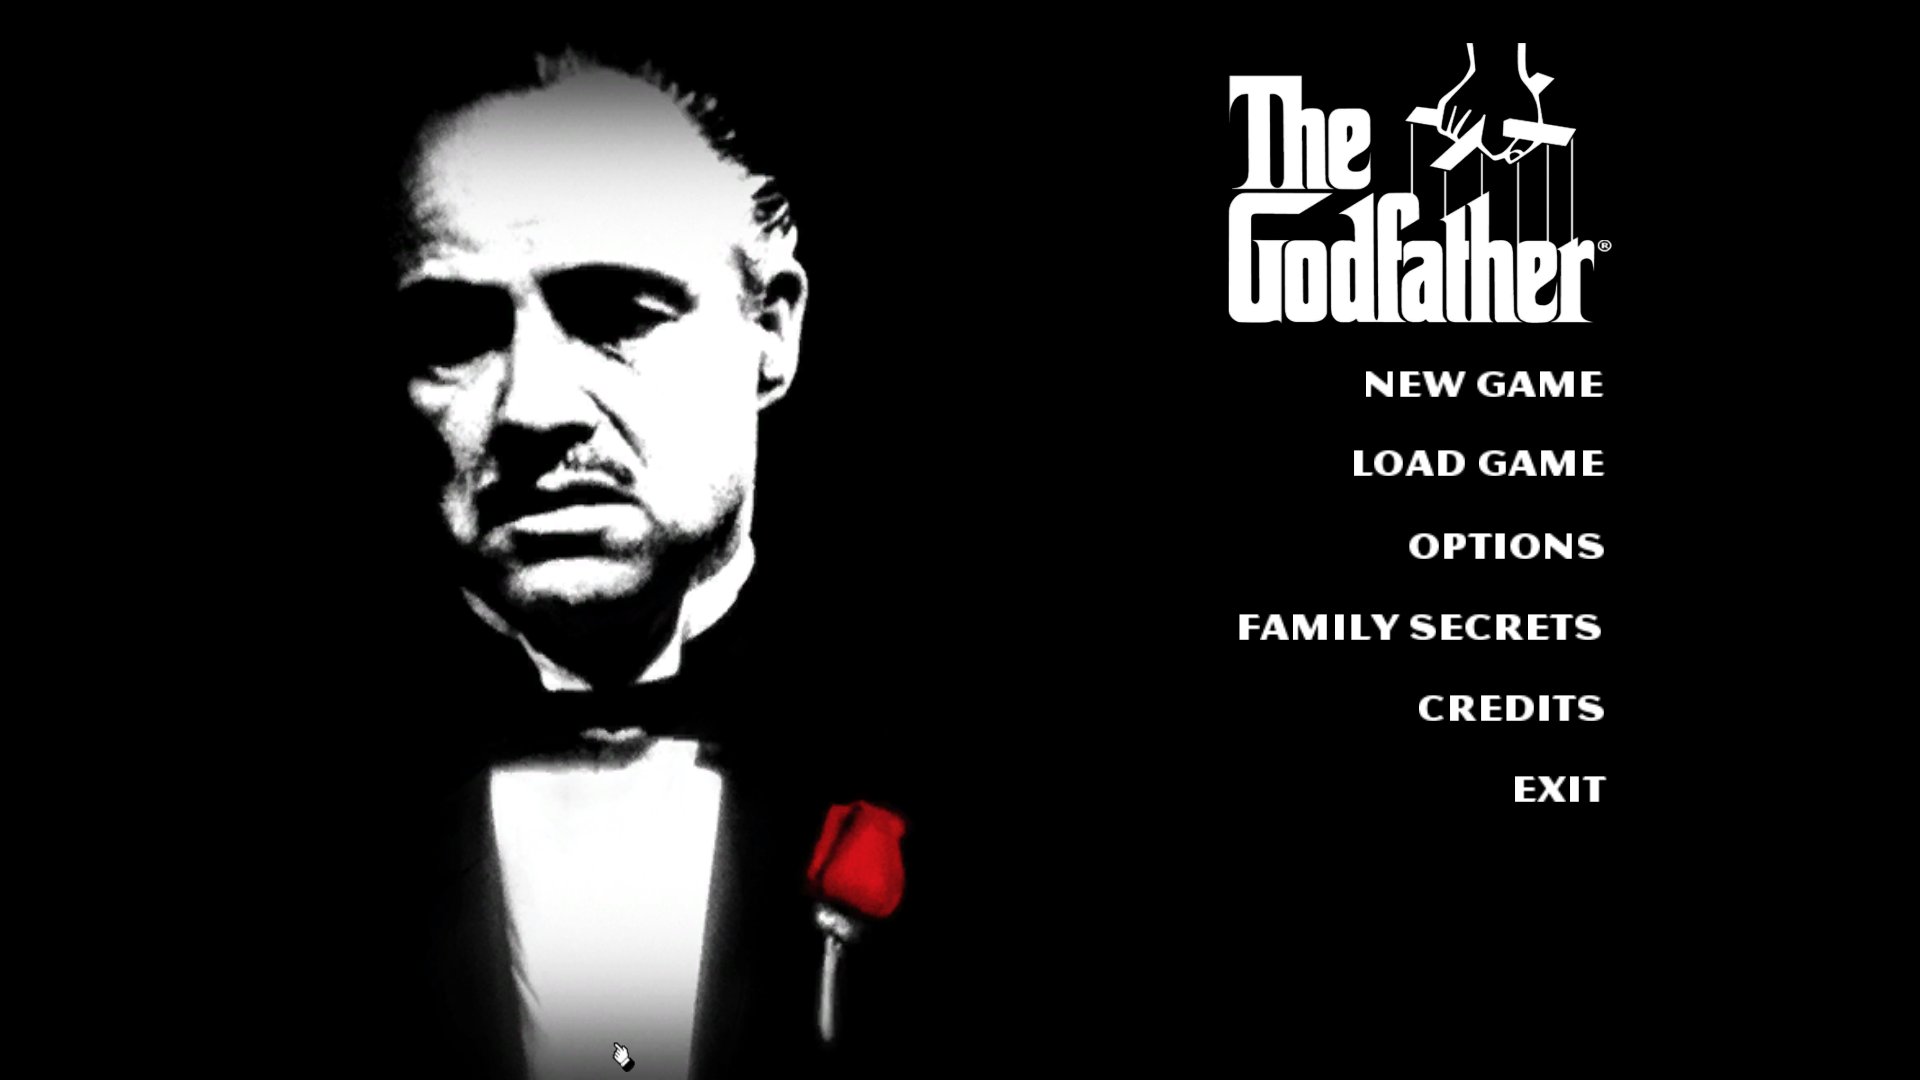 THE GODFATHER: THE GAME